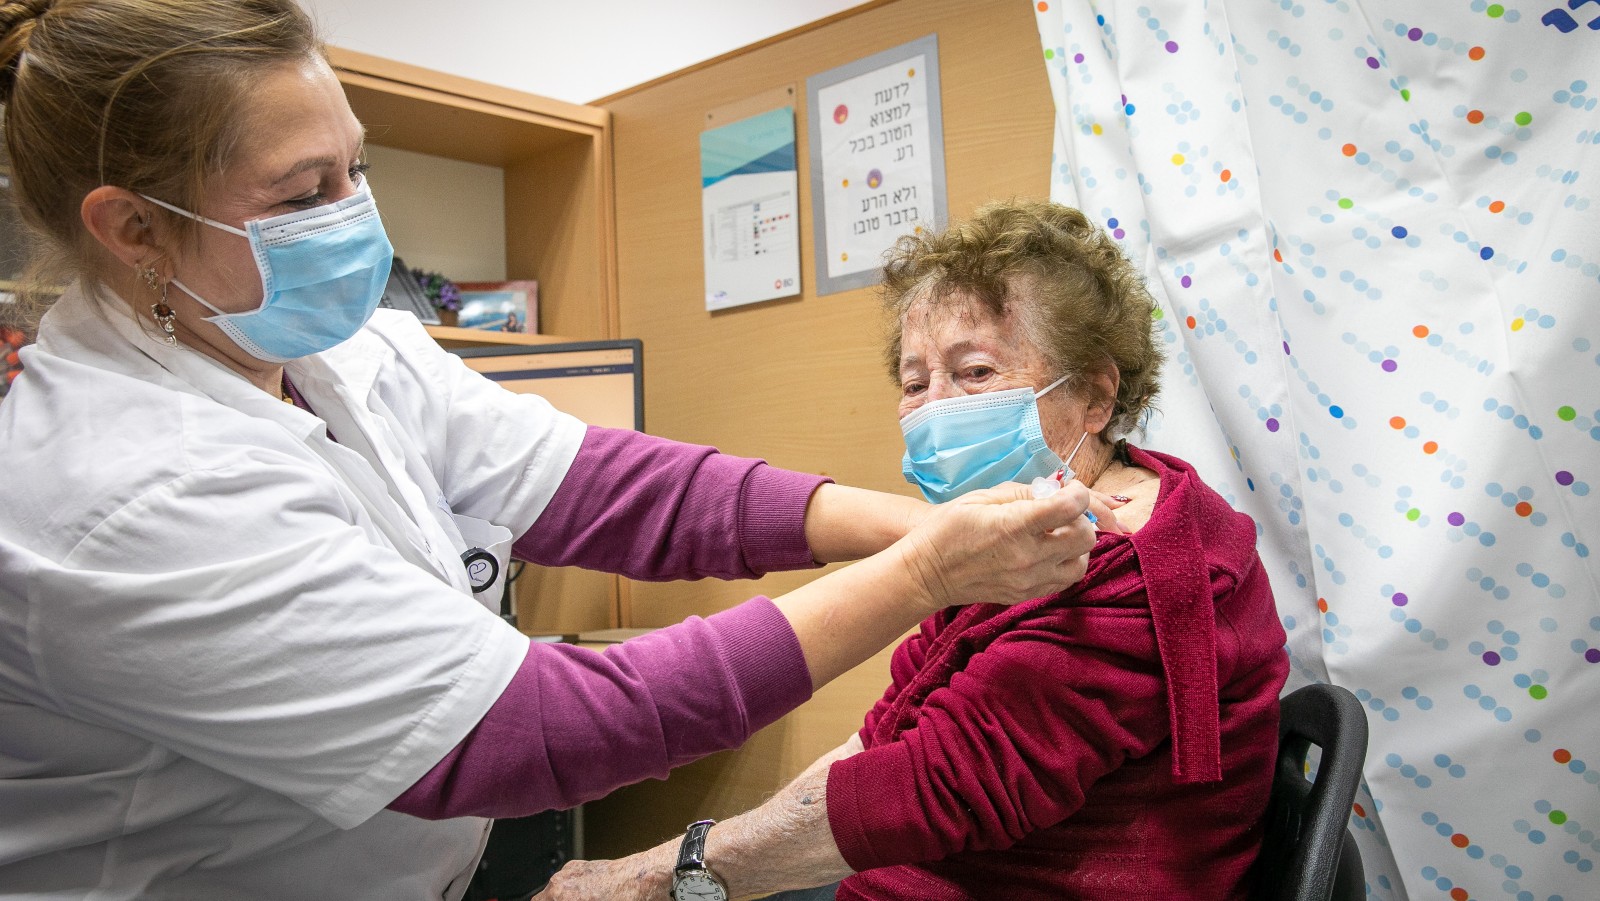 A 95-year-old woman receives a Covid-19 vaccine booster in Rehovot, January 10, 2022. Photo by Yossi Aloni/Flash90